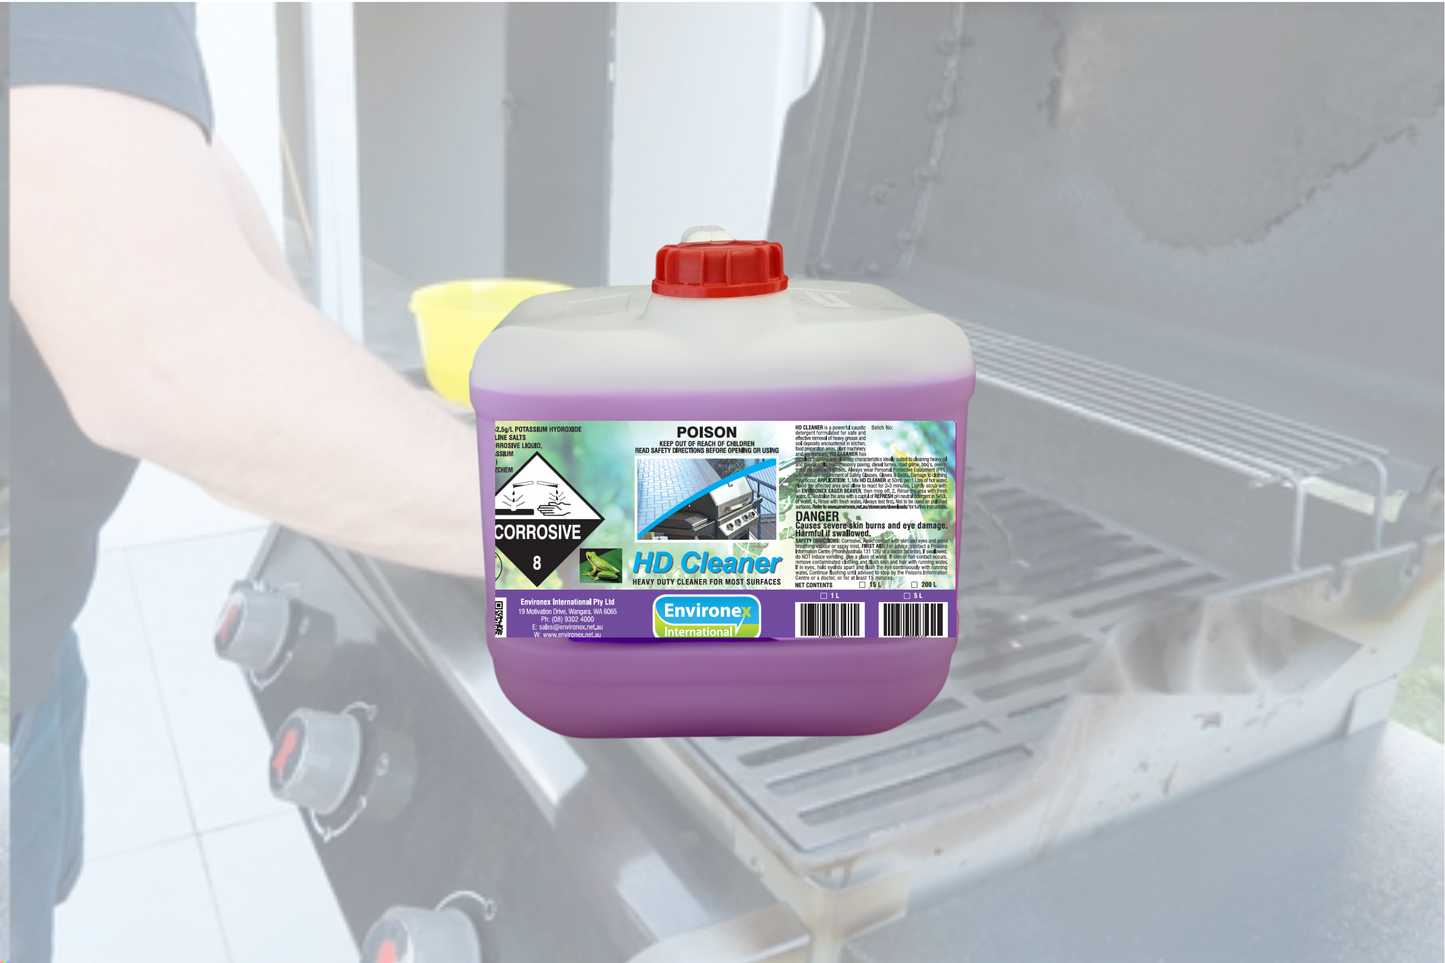 HD Cleaner : Heavy-duty cleaner and degreaser